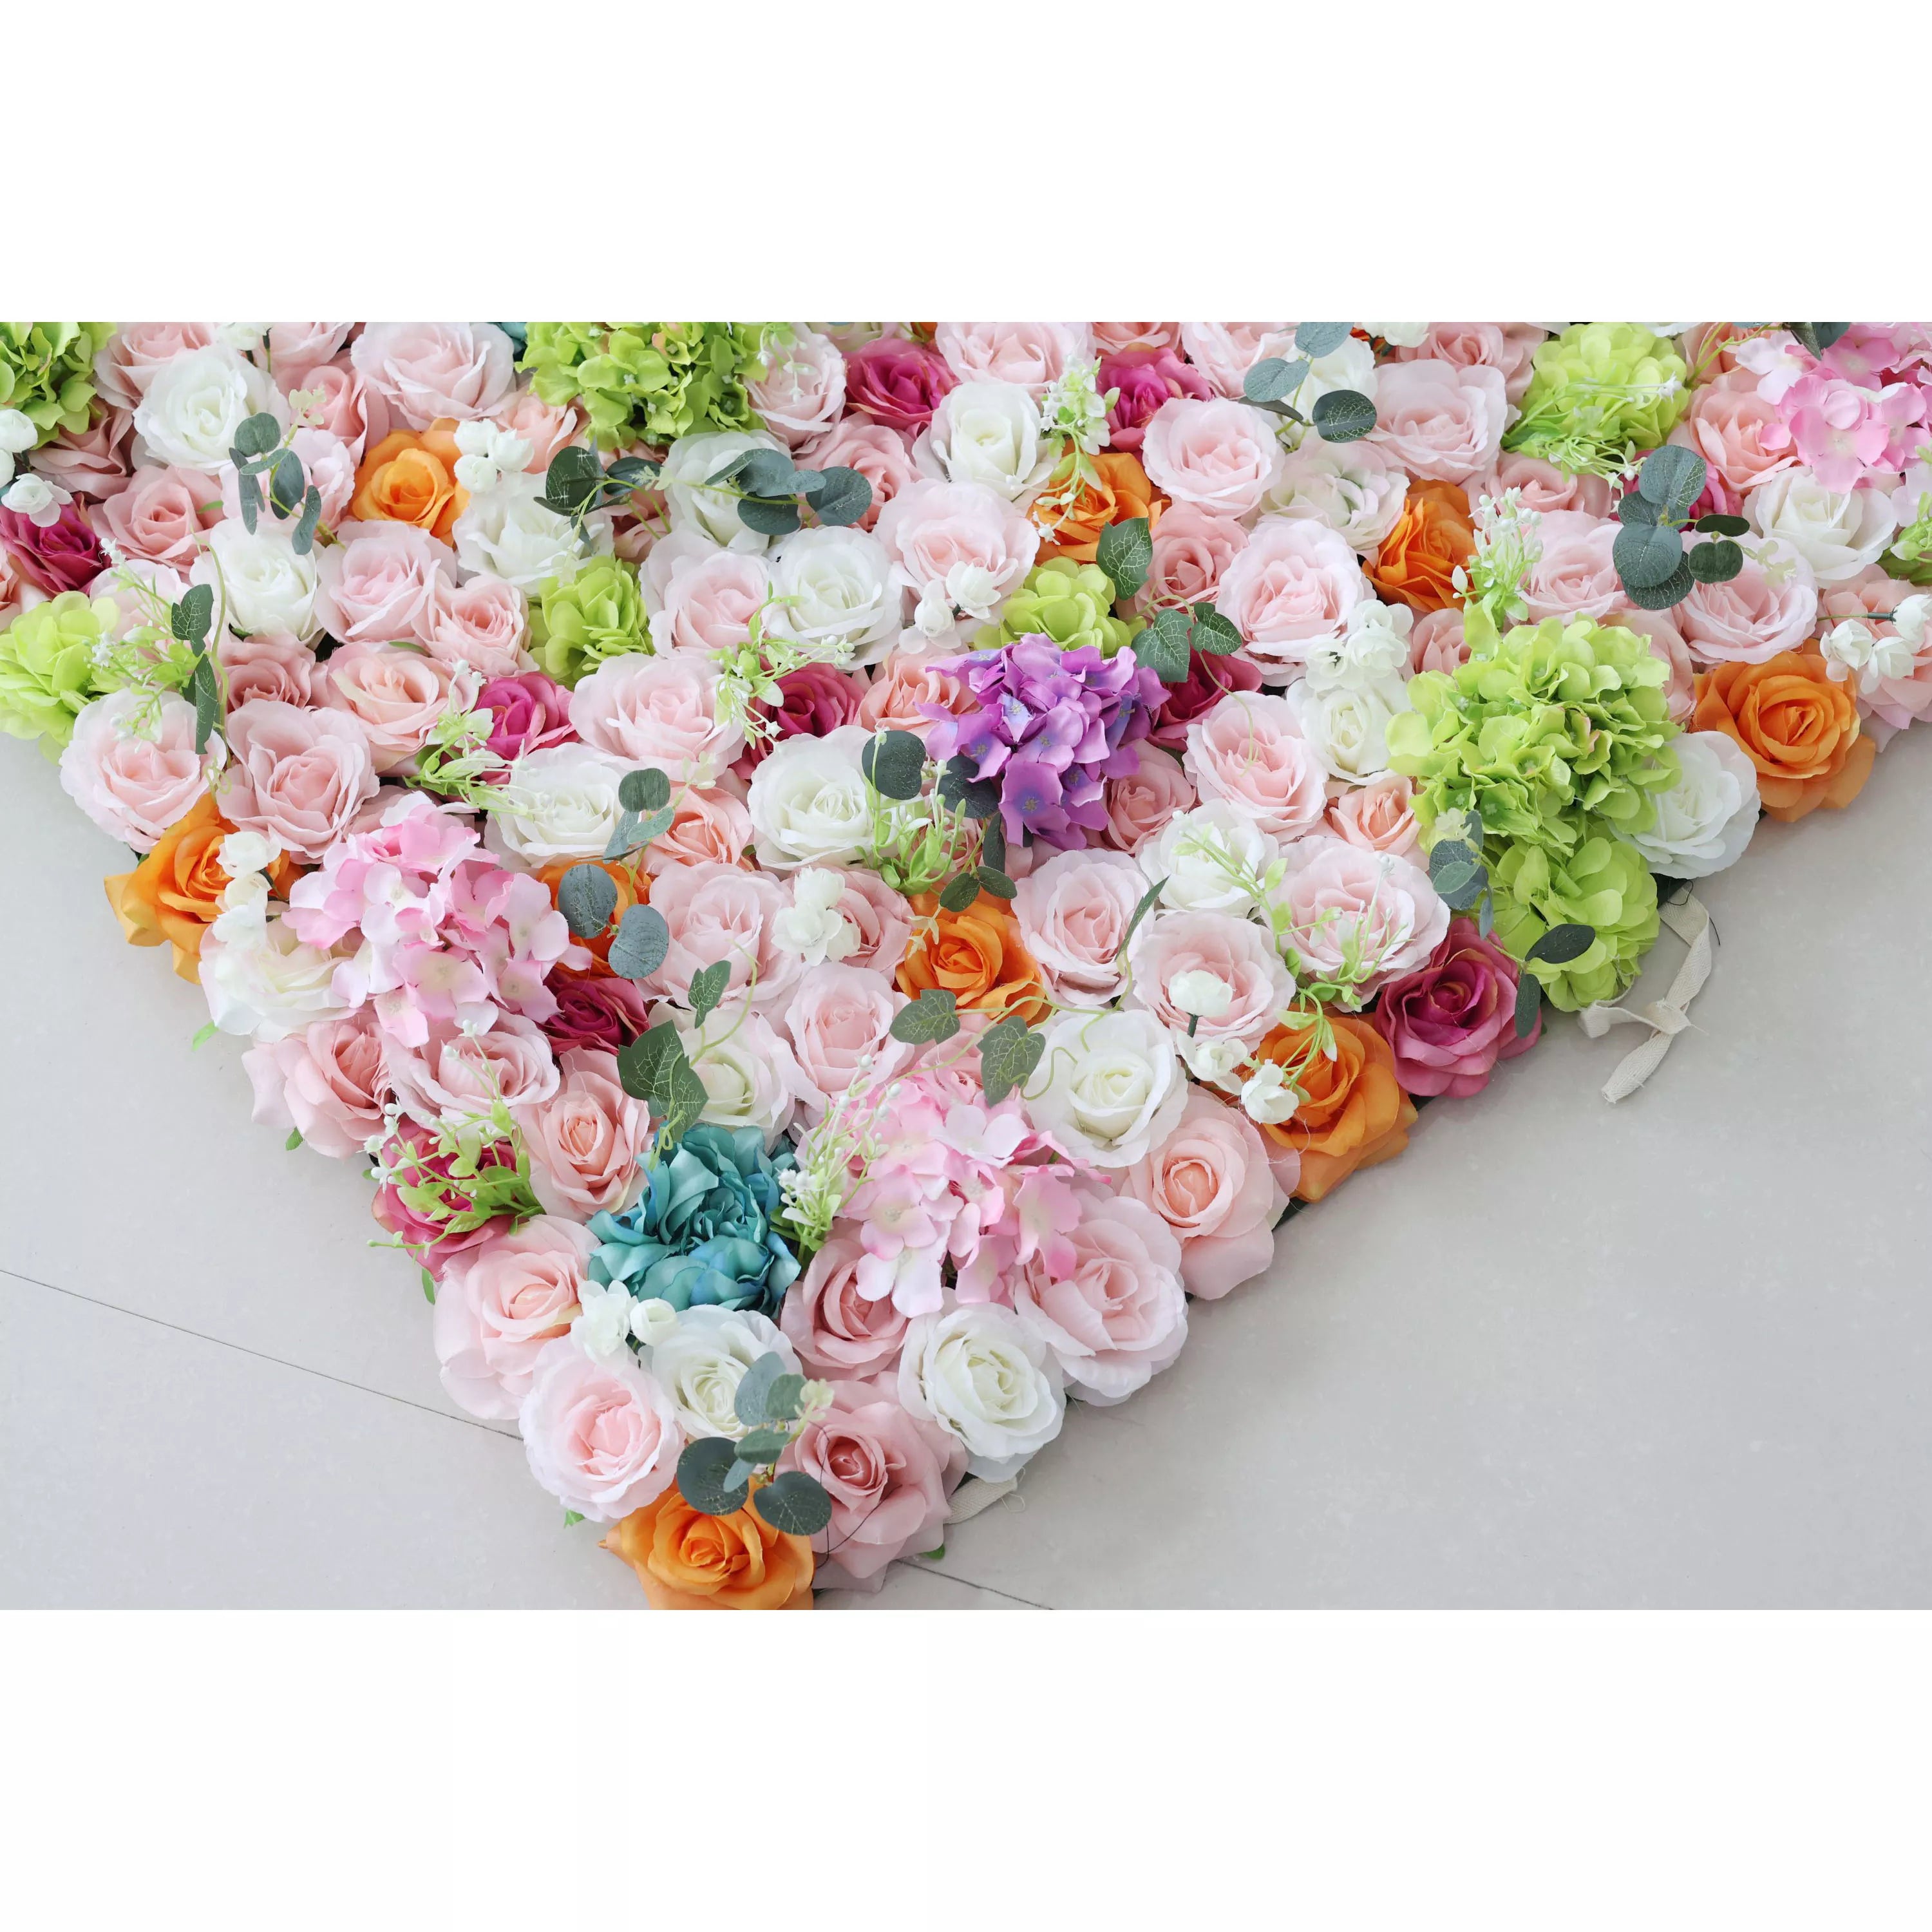 ValarFlower Artificial Floral Wall Backdrop: Enchanted Garden Gala - A Dazzling Dance of Delicate Hues and Vibrant Blooms.-VF-248